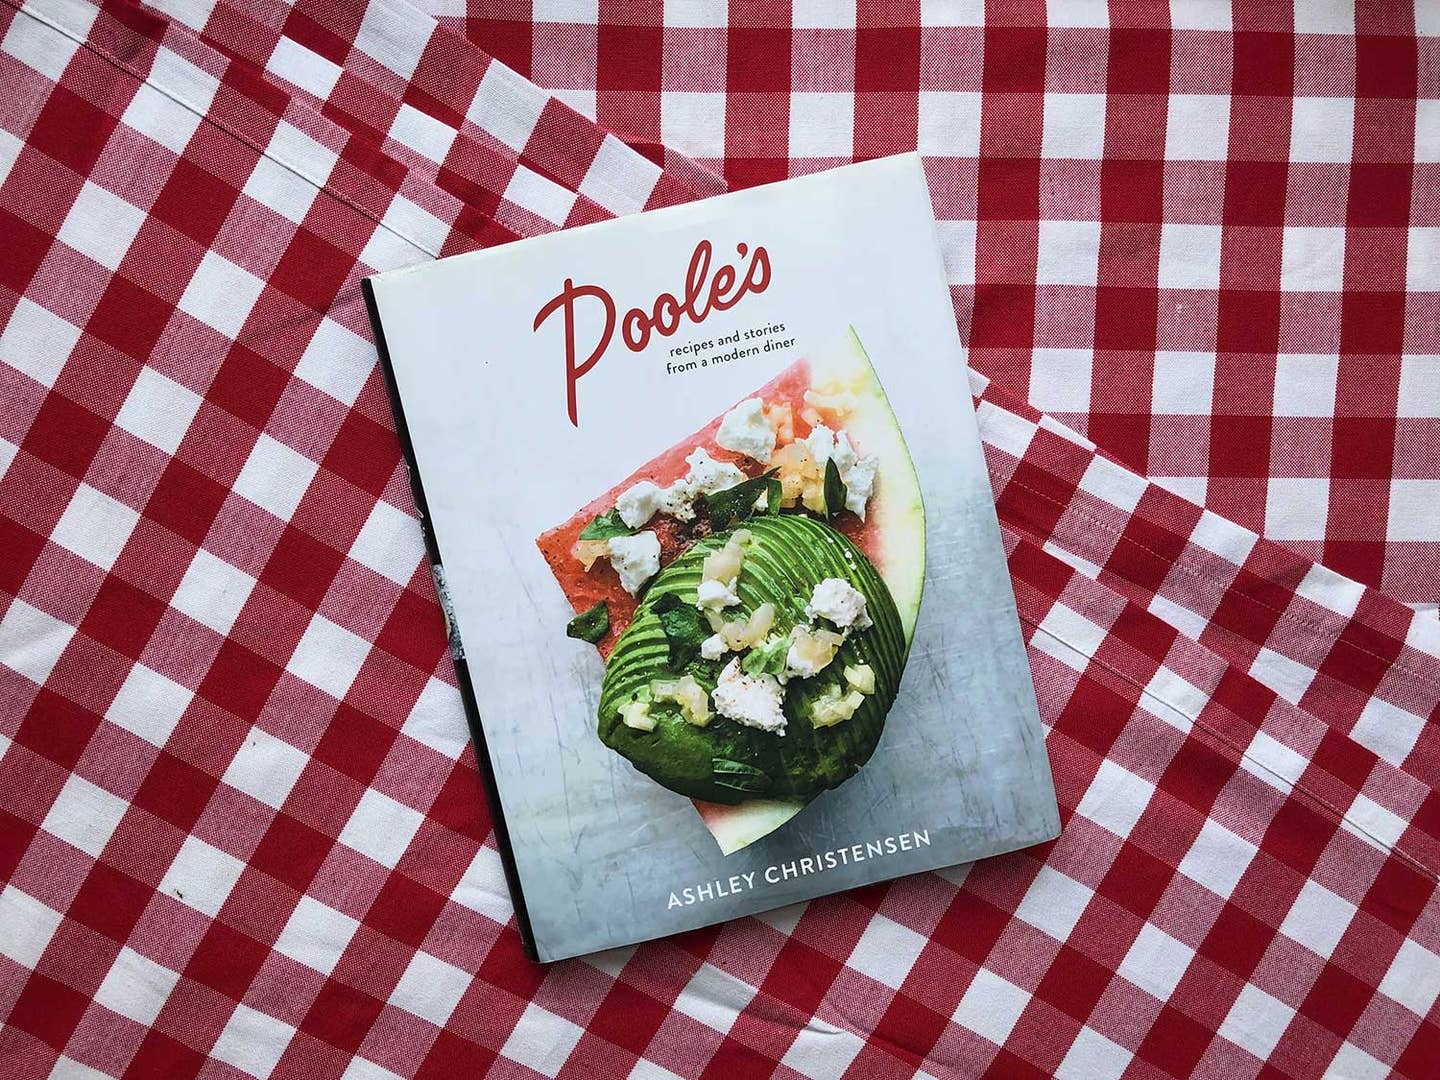 Transport Yourself to Poole’s with This Month’s Cookbook Club Pick